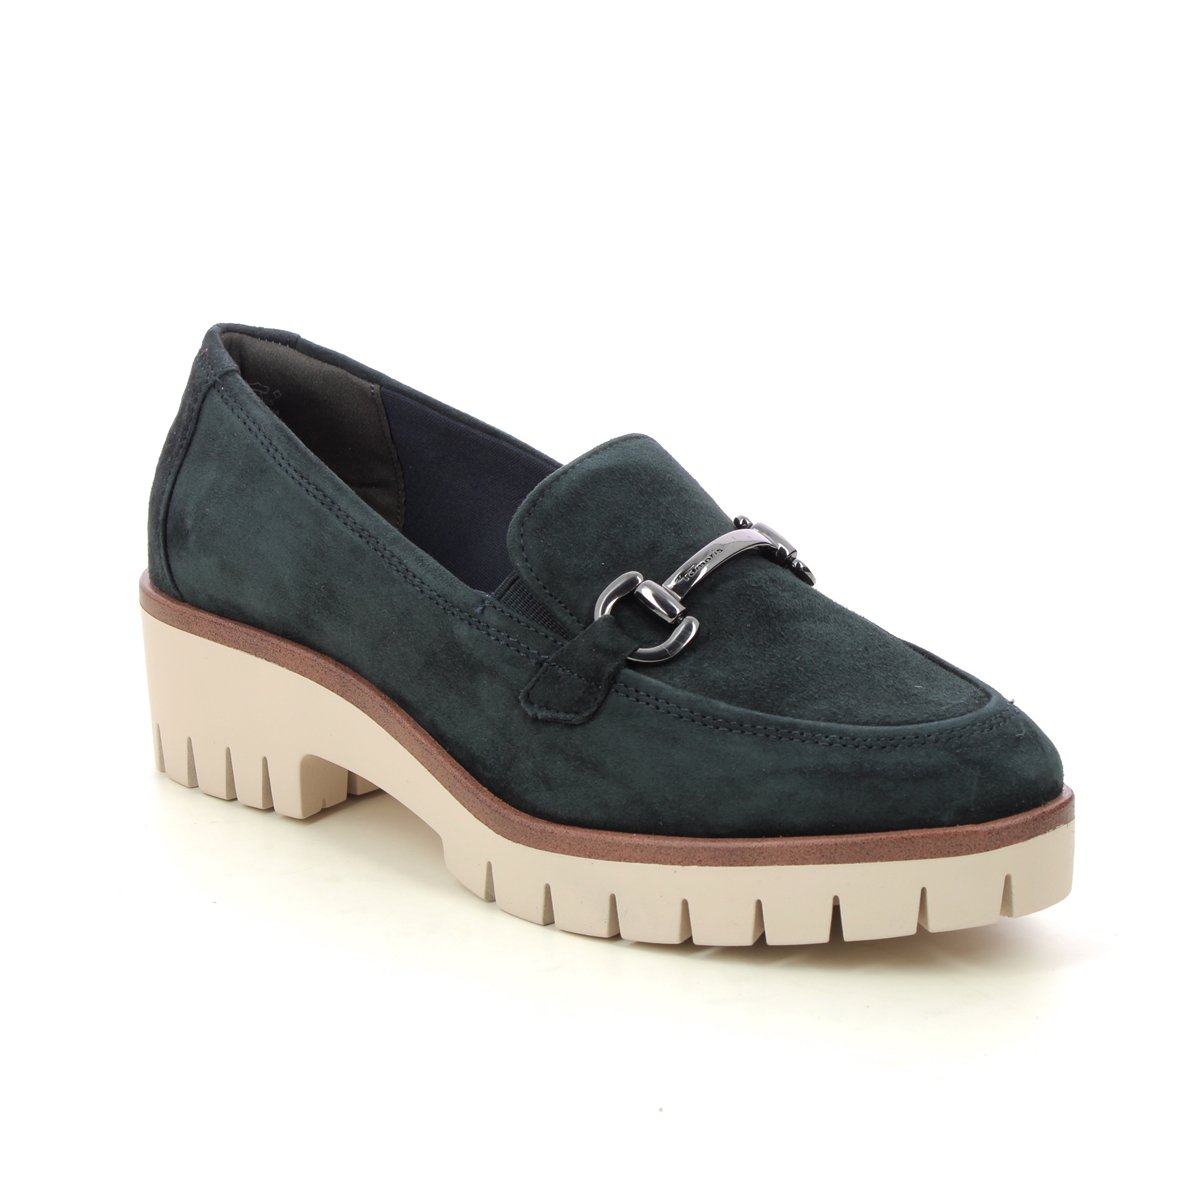 Tamaris Porsche Chunky Navy Nubuck Womens loafers 24419-42-805 in a Plain Leather in Size 41